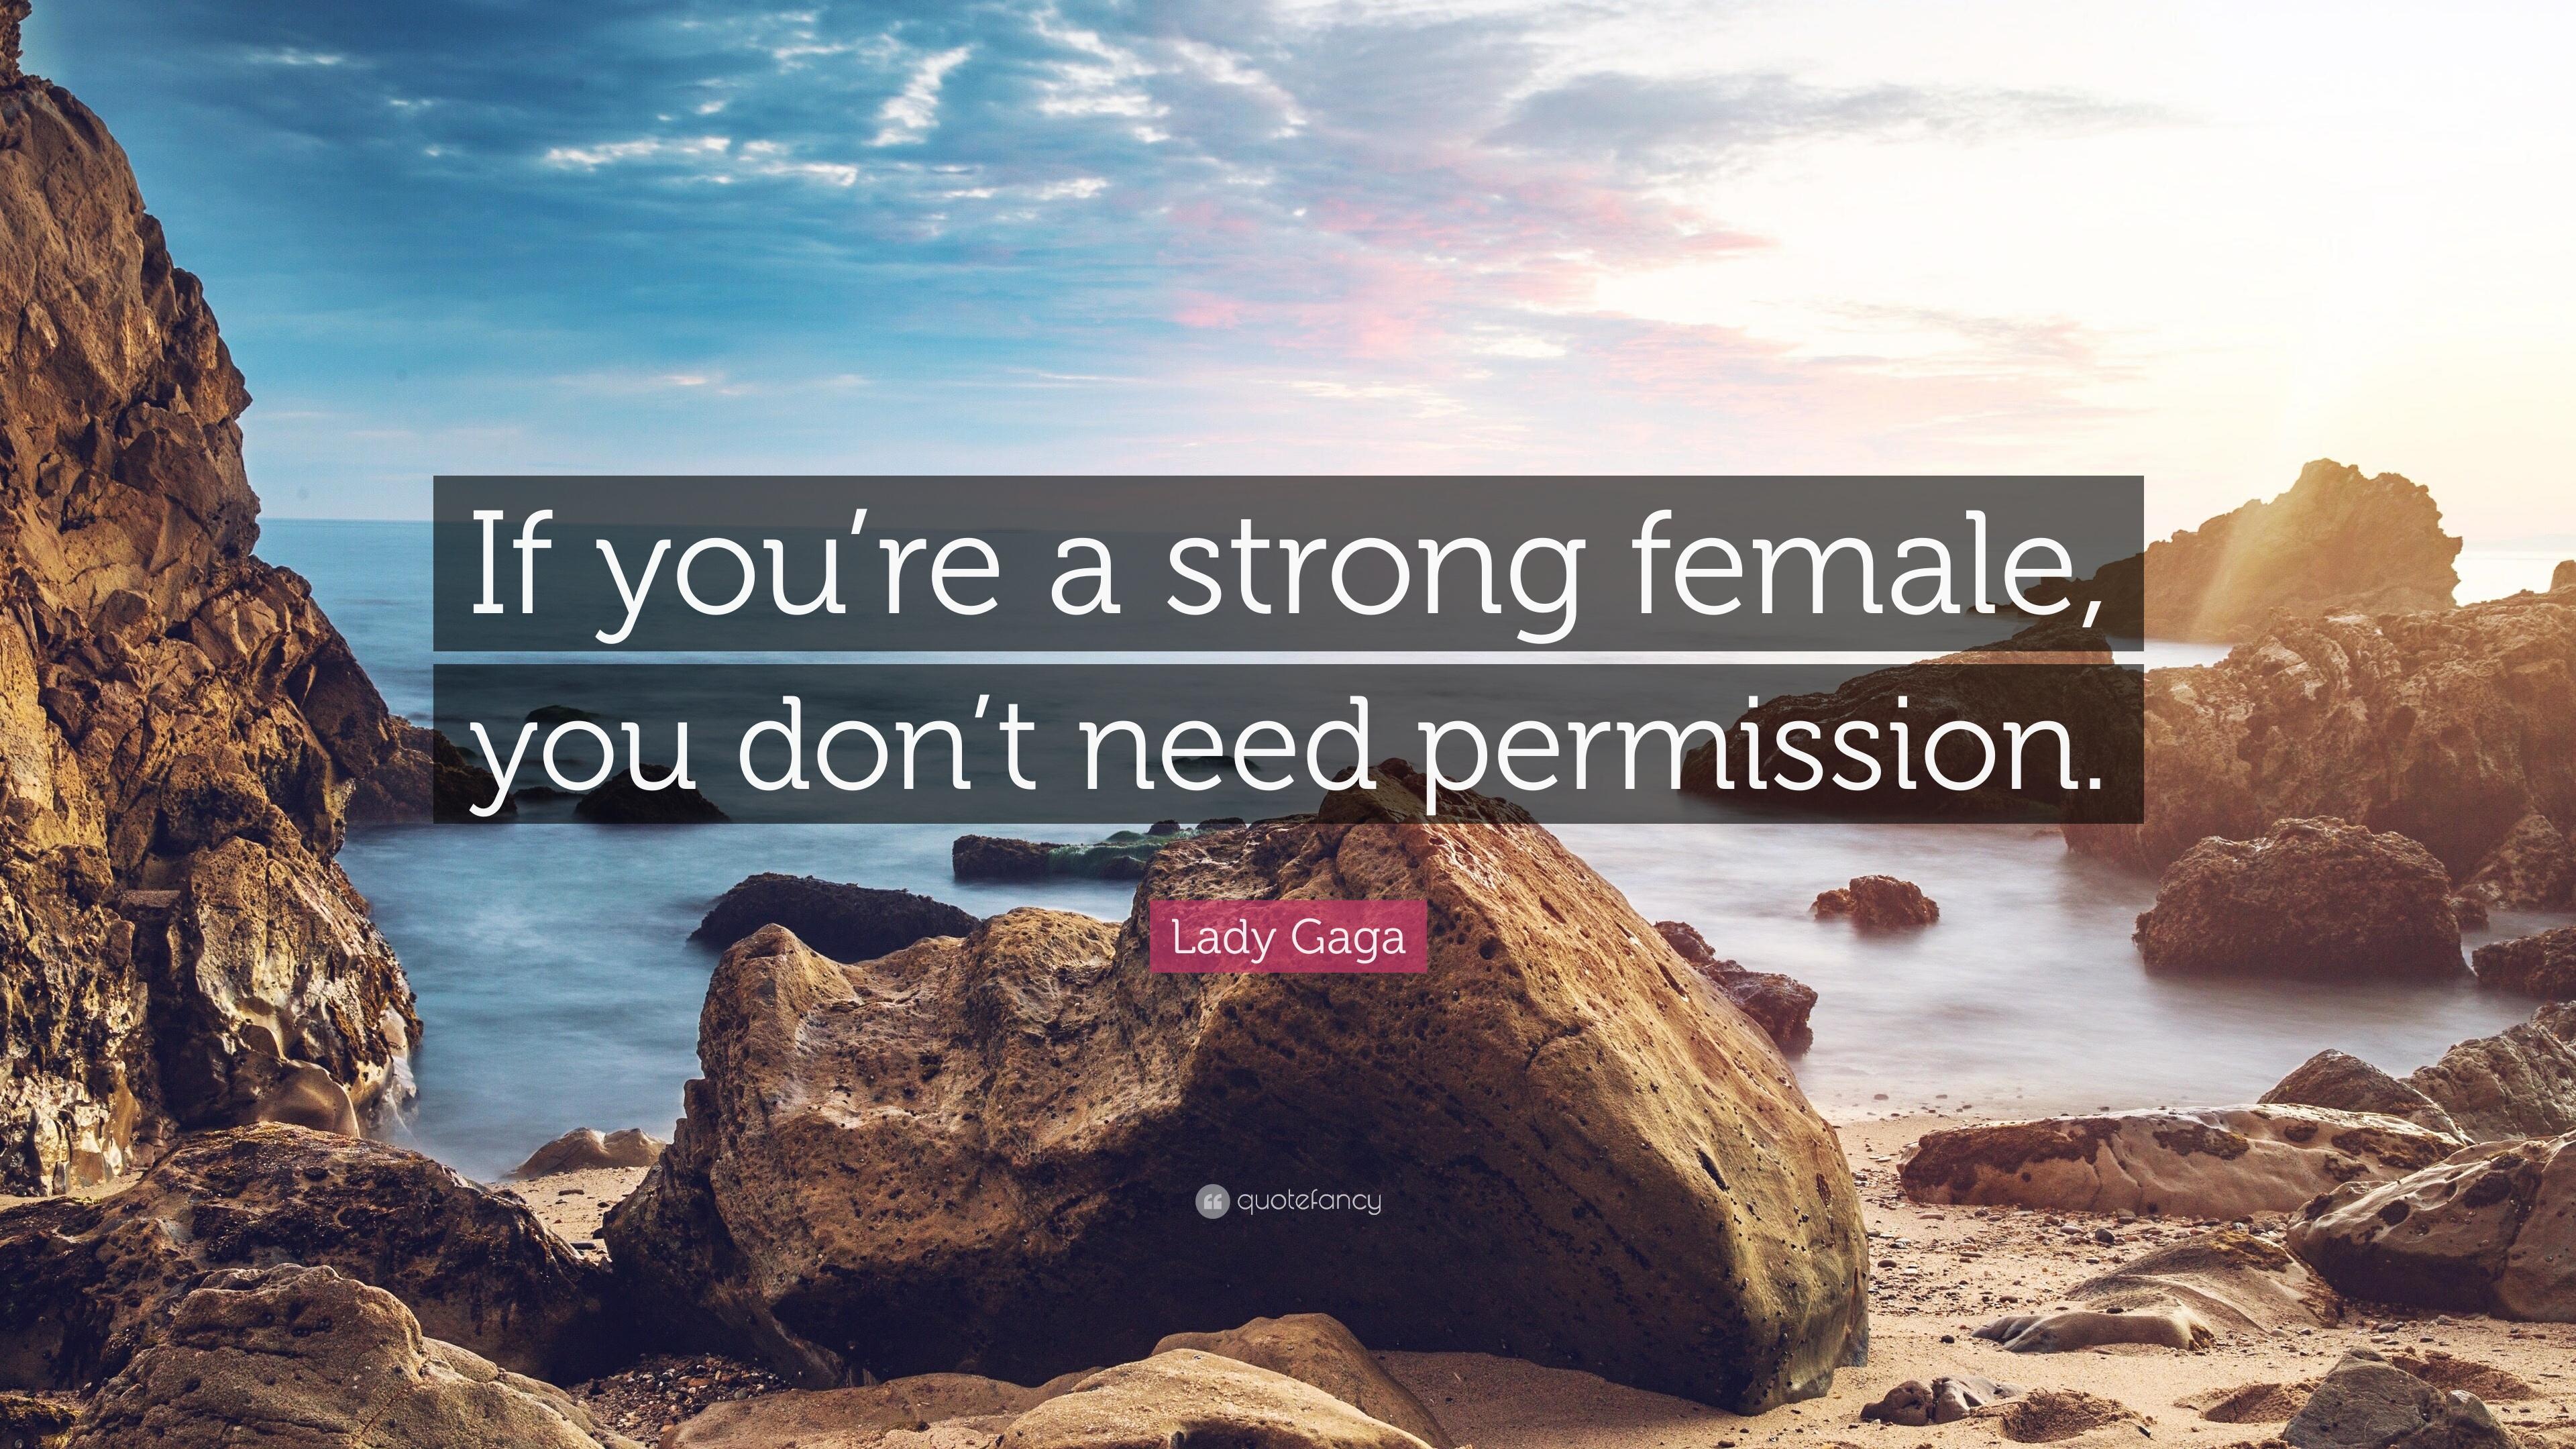 Lady Gaga Quote: “If you're a strong female, you don't need